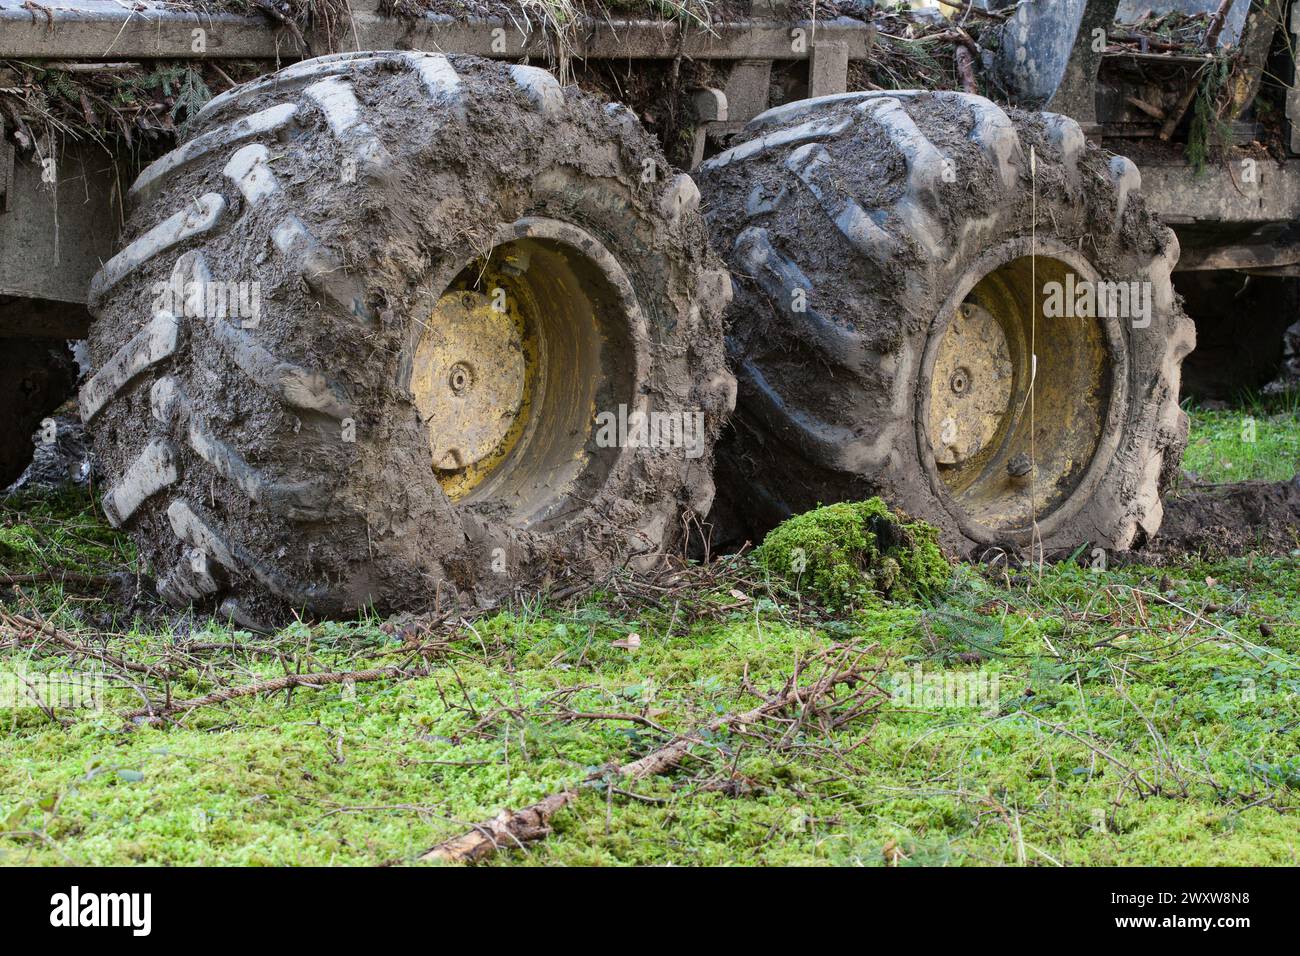 Deeply sunken tires reveal the impact of heavy forestry machinery on forest soil. Soil disturbance due to compaction is undeniable. Stock Photo